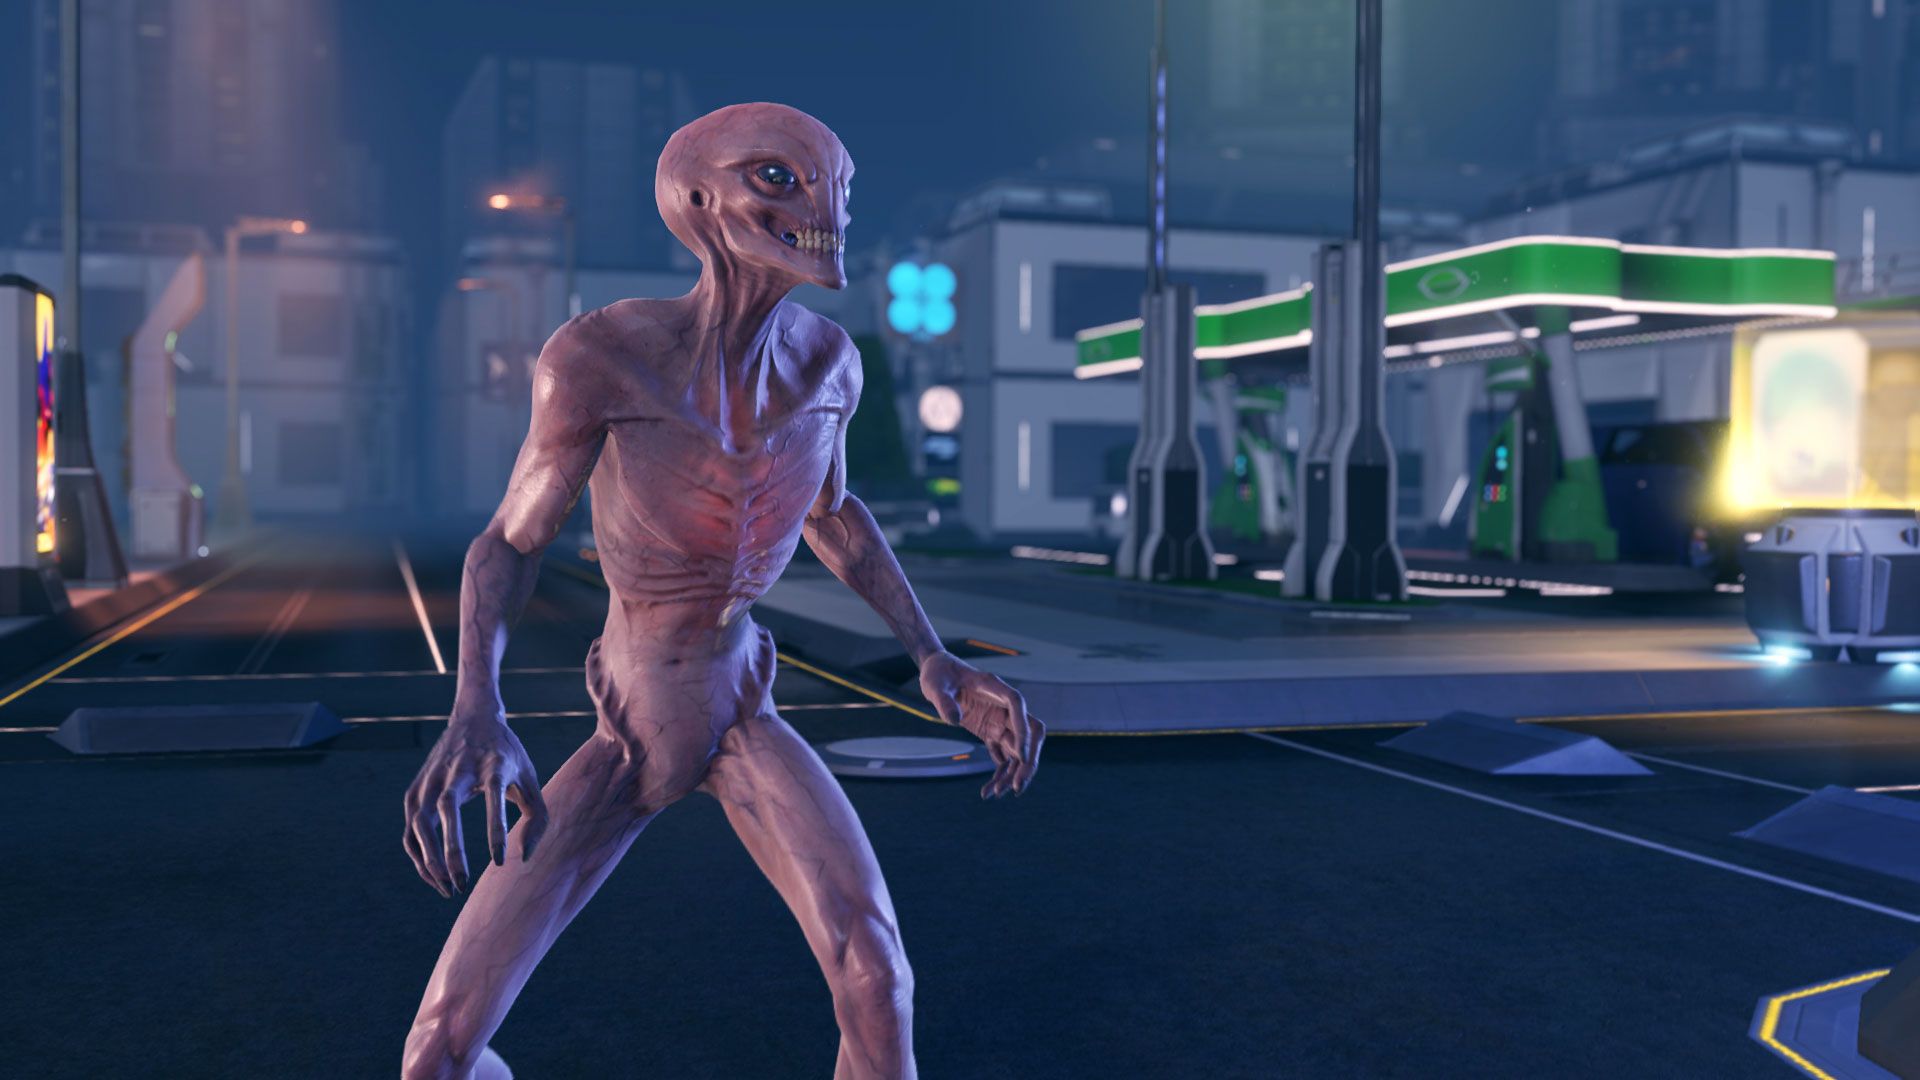 XCOM 2 War of the Chosen Cheats & Trainers for PC